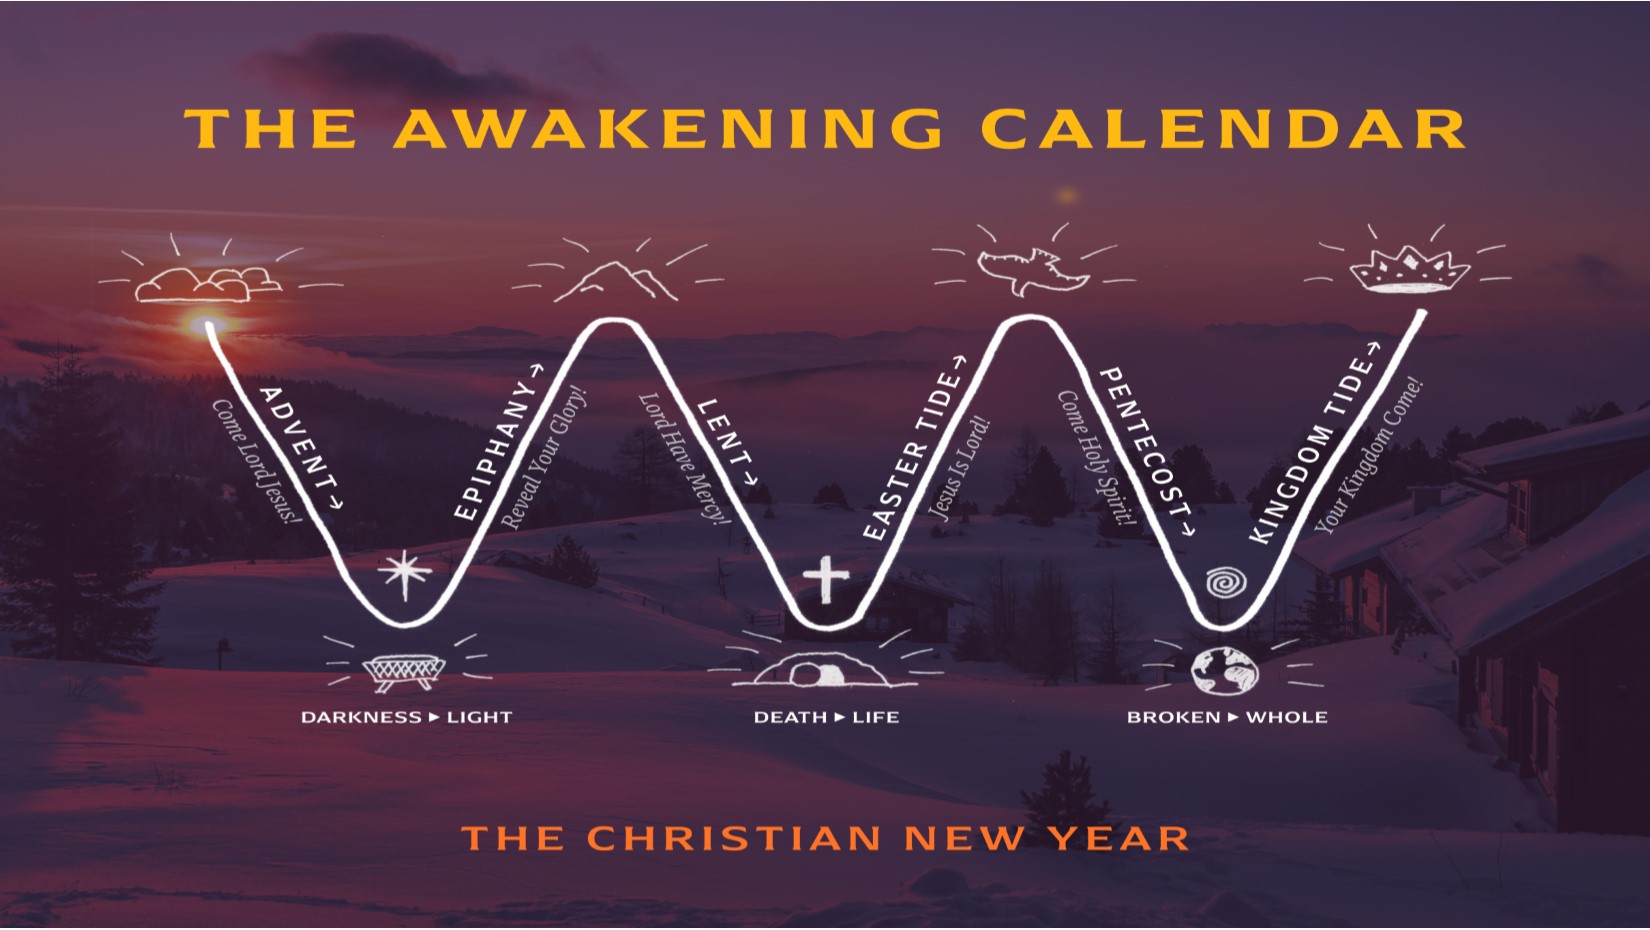 12.06.2020 The 2nd Sunday of Advent The Christian New Year: A New Year of Anticipation Revelation 21:1 – 4